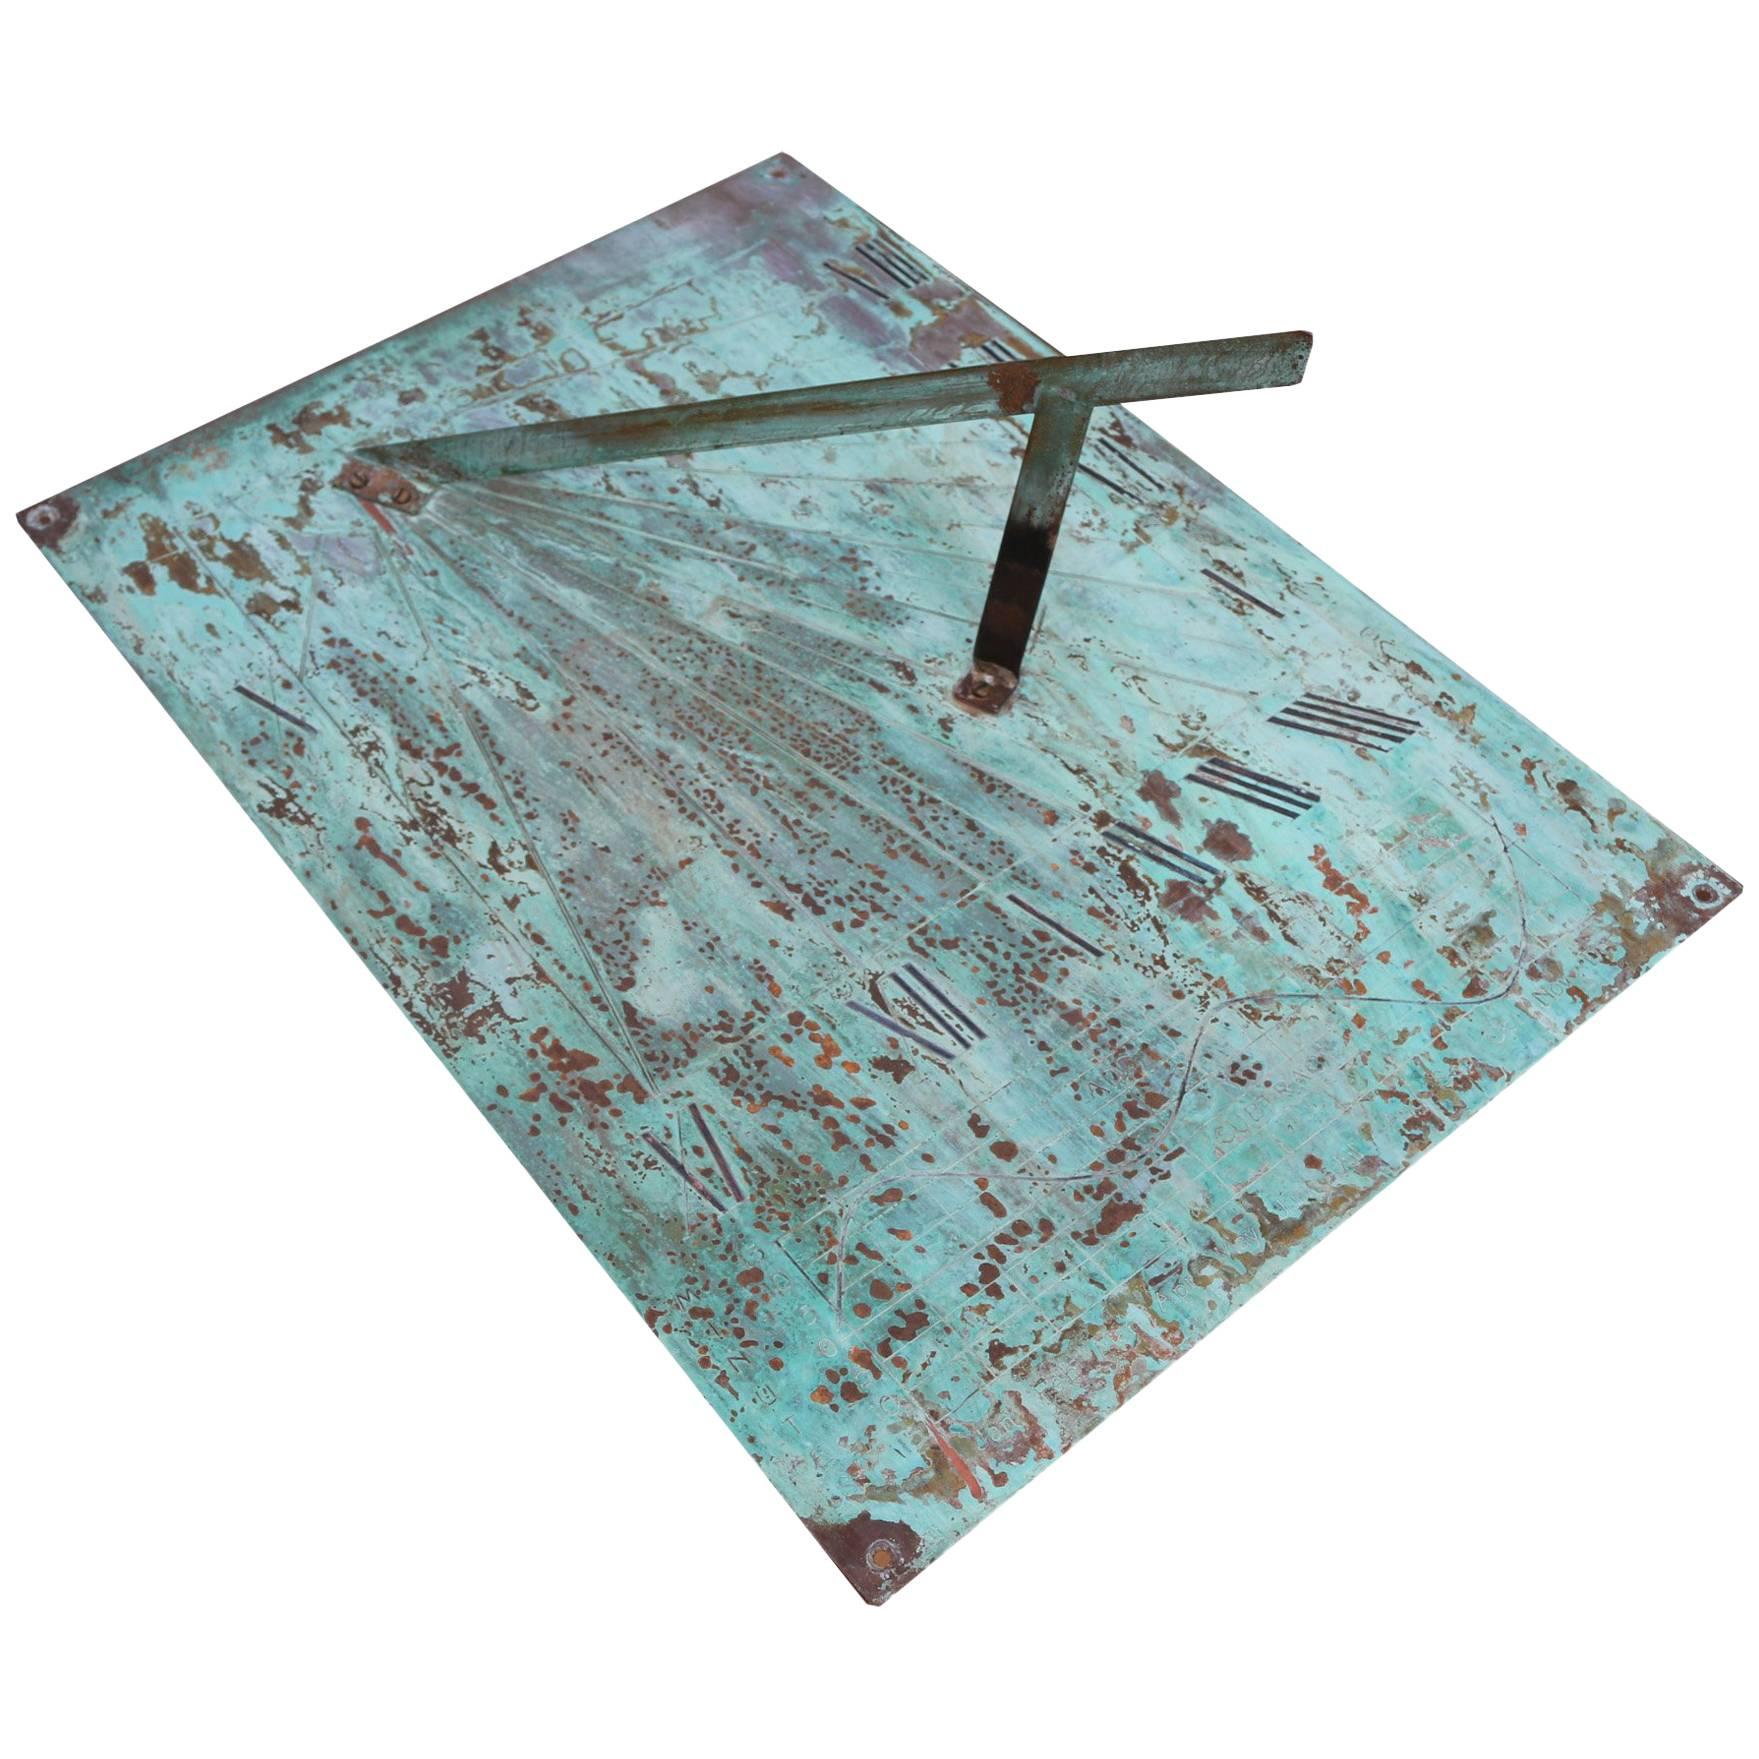 20th Century Wall-Mounted Copper Sundial